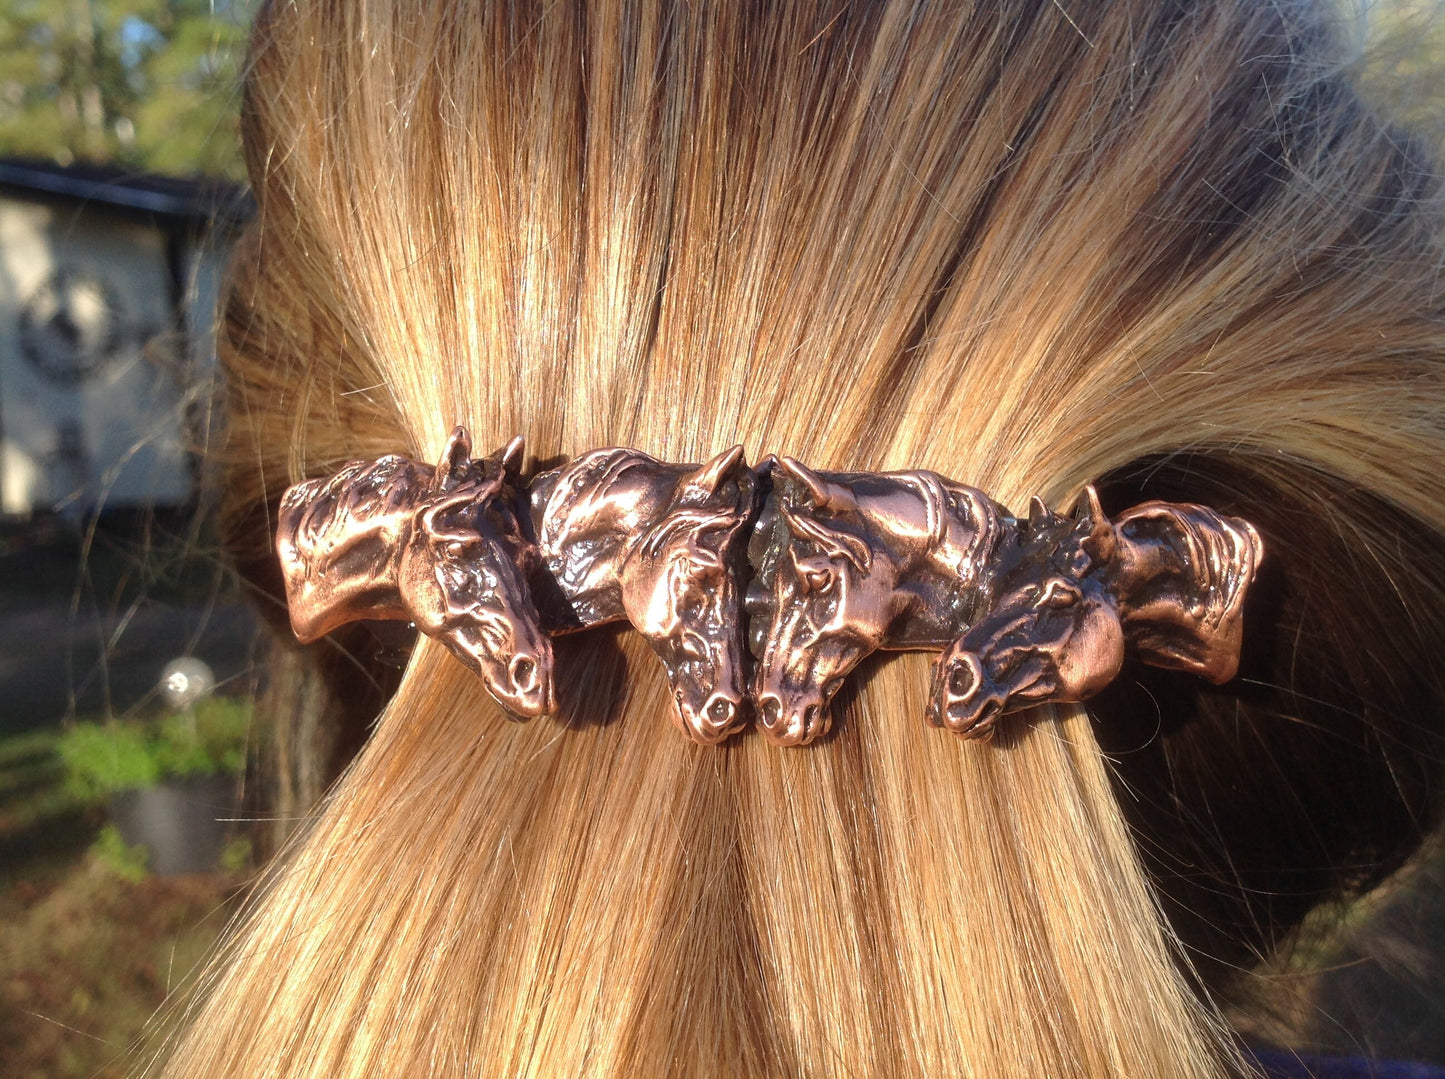 Horse Jewelry Four Horses barrette NEW antique copper finish!  Lead free pewter hair or scarf clip